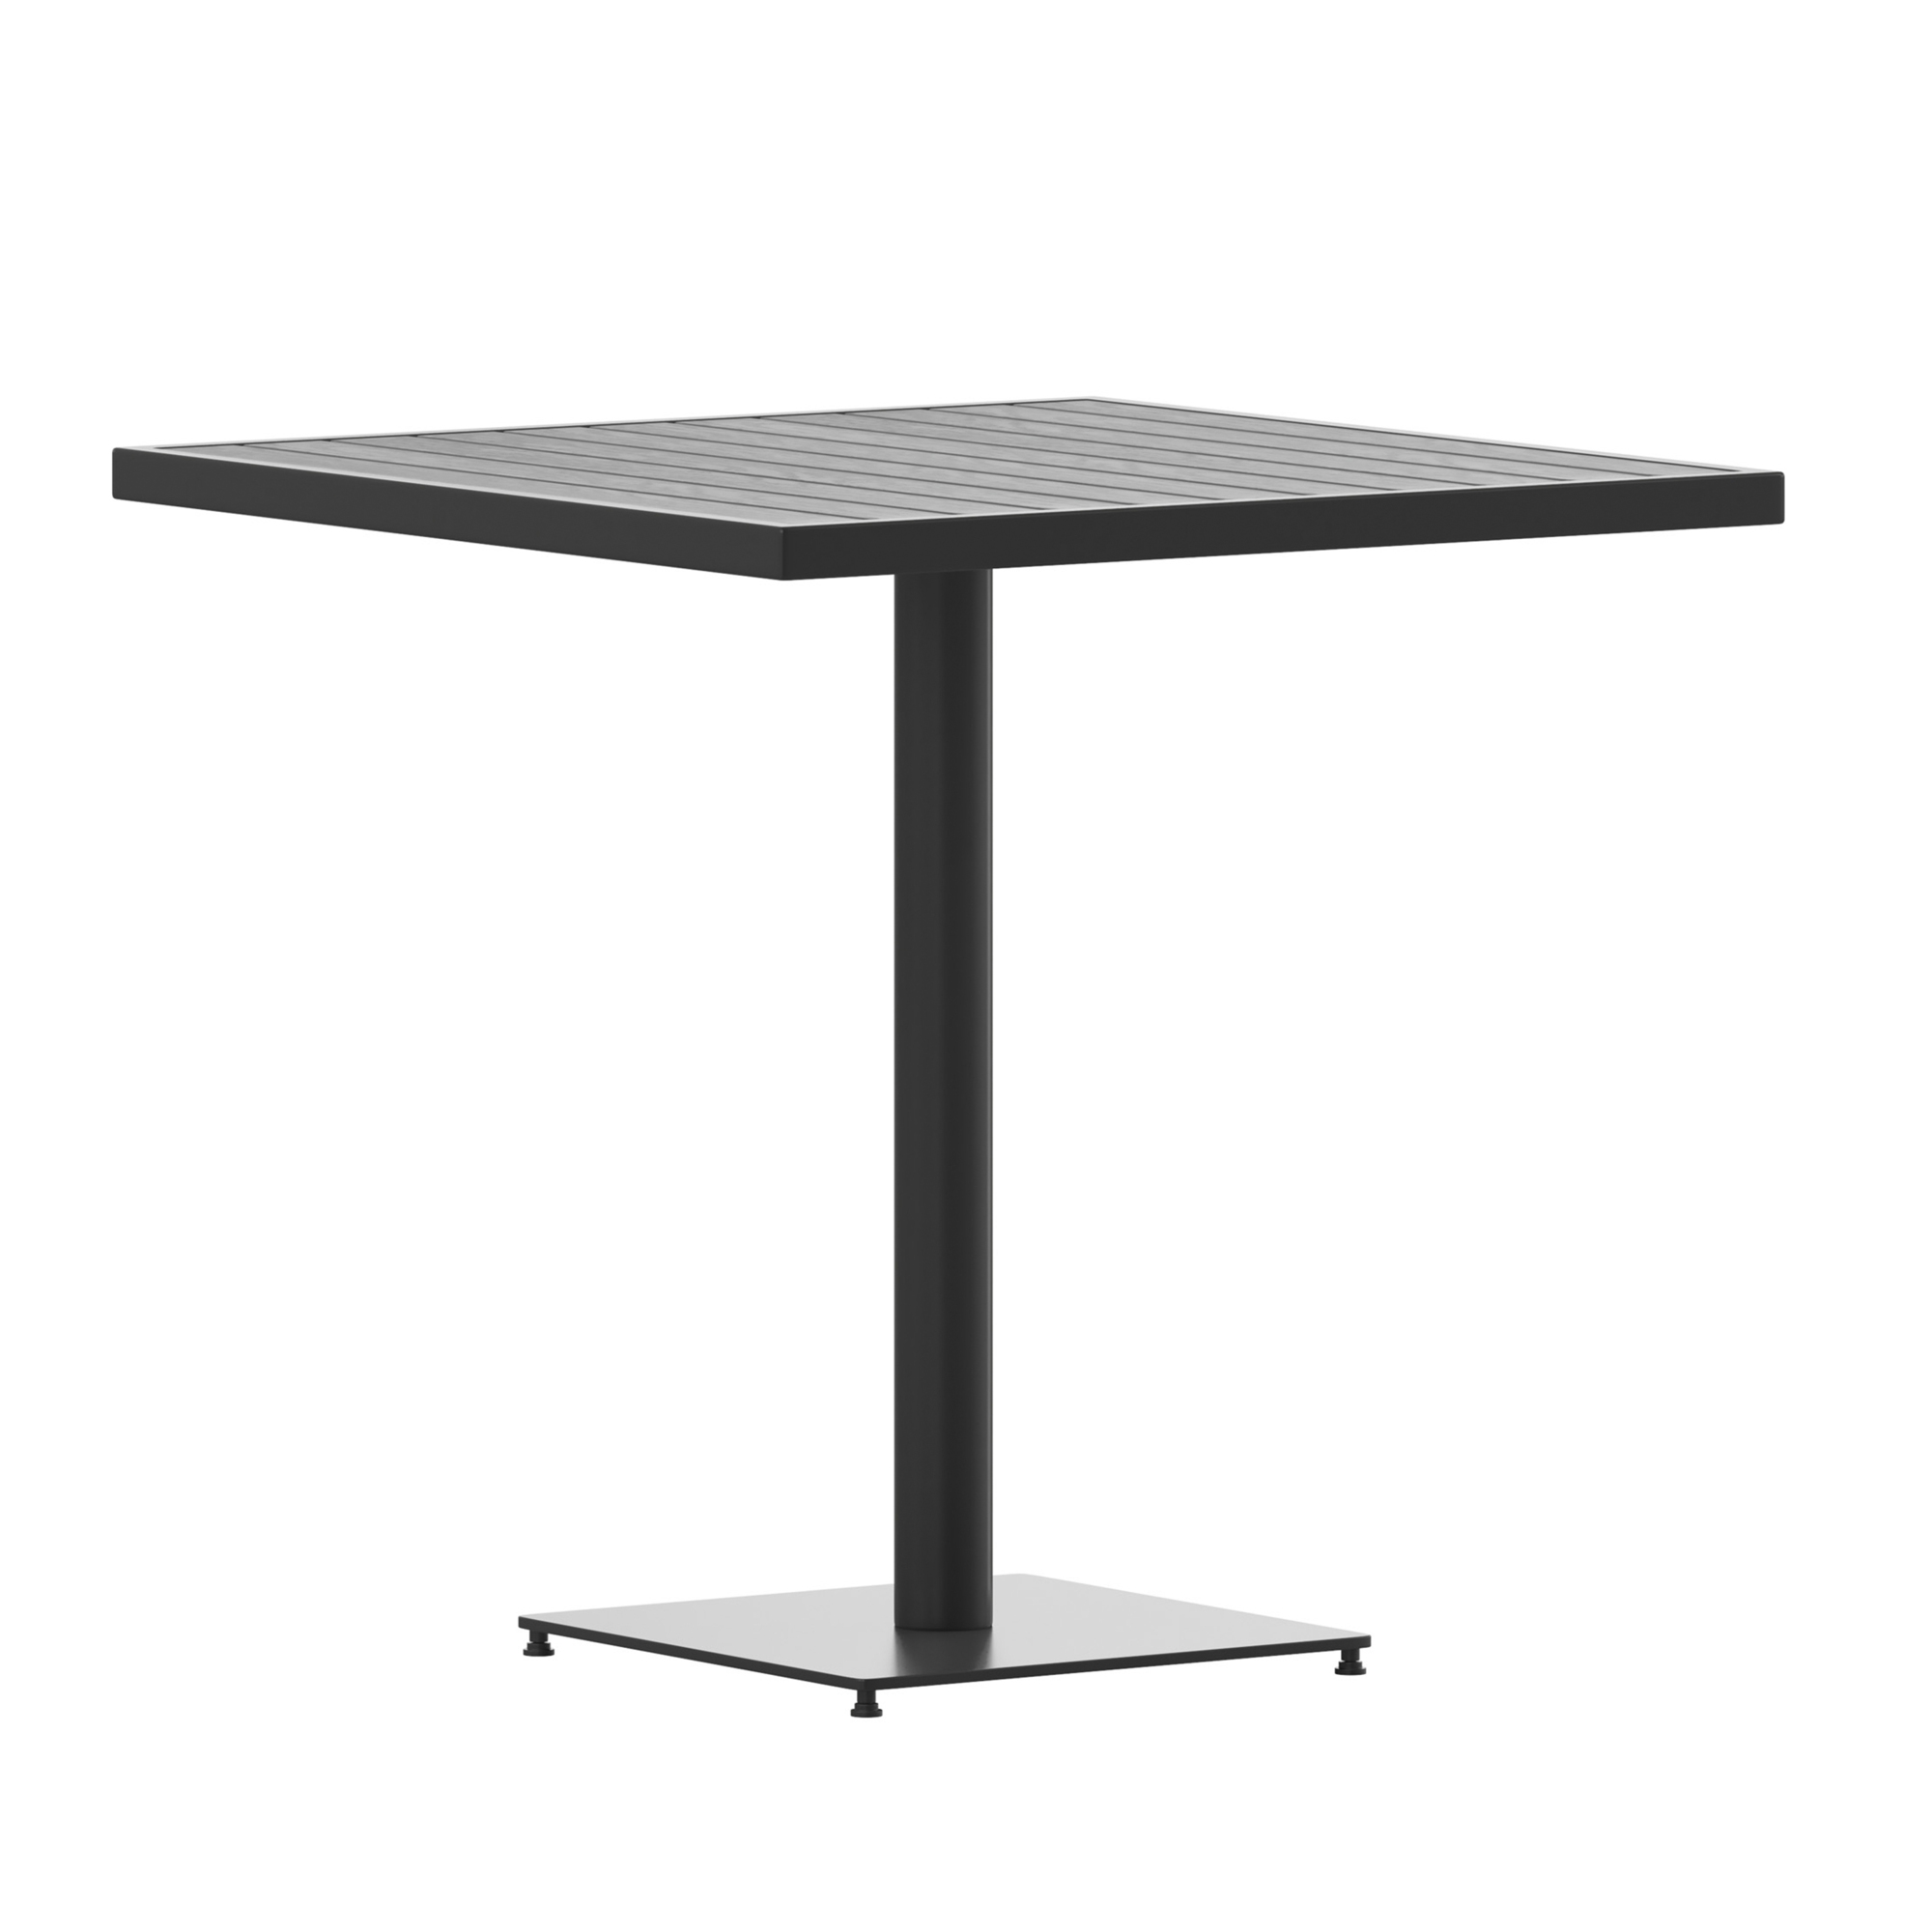 Flash Furniture, 30Inch SQ Outdoor Gray Wash Faux Teak Poly Slat Table, Table Shape Square, Primary Color Gray, Height 30 in, Model XUDGHW1045GY